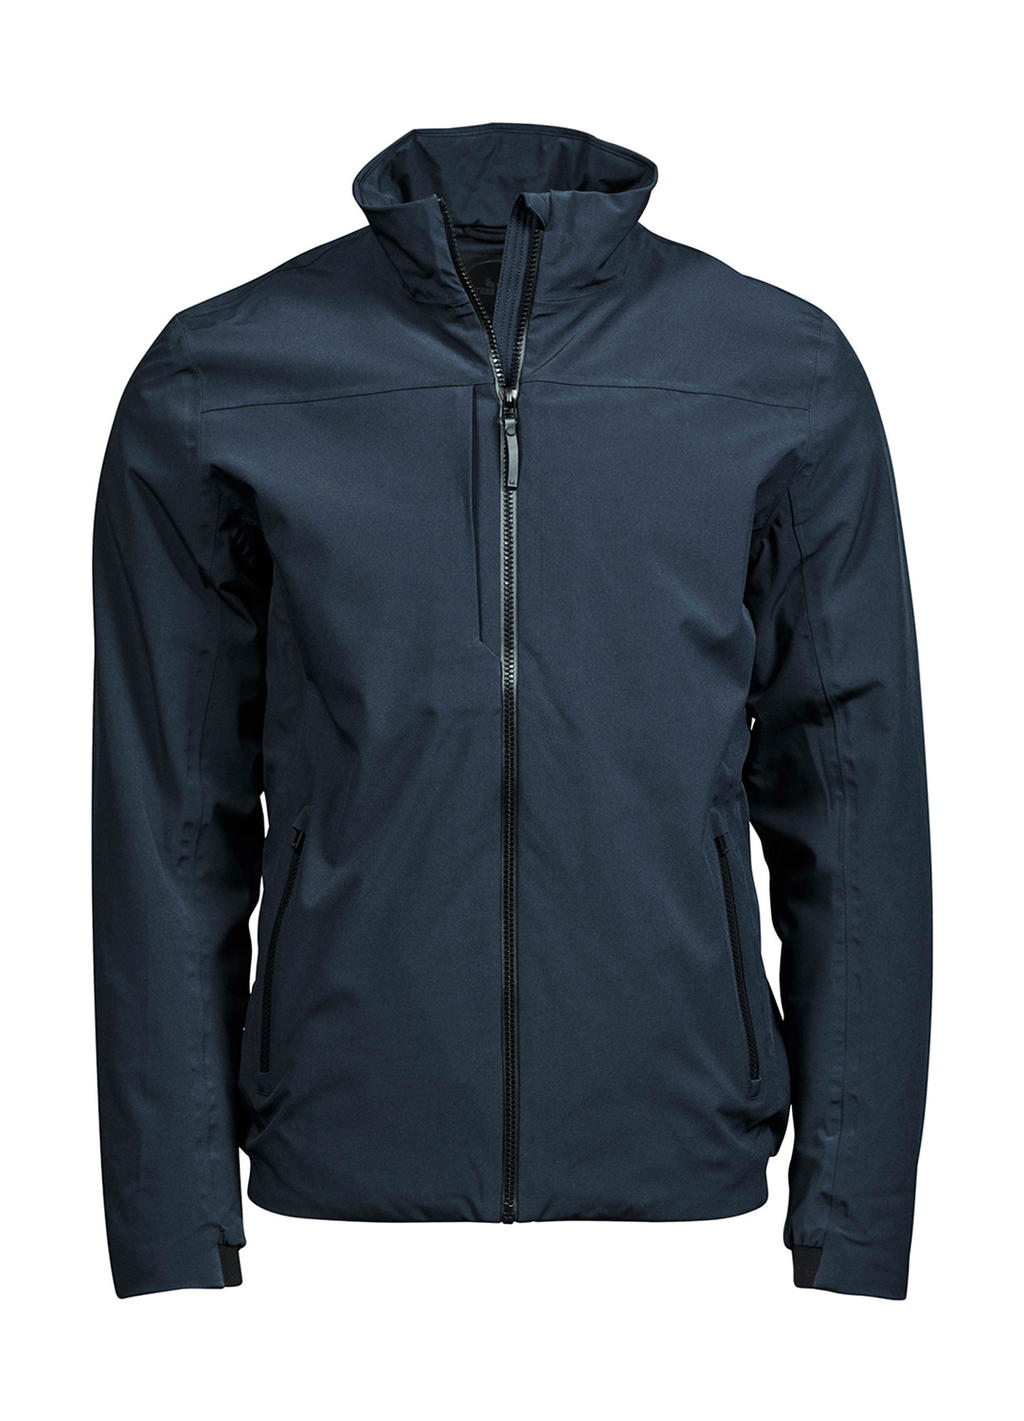  All Weather Jacket in Farbe Navy